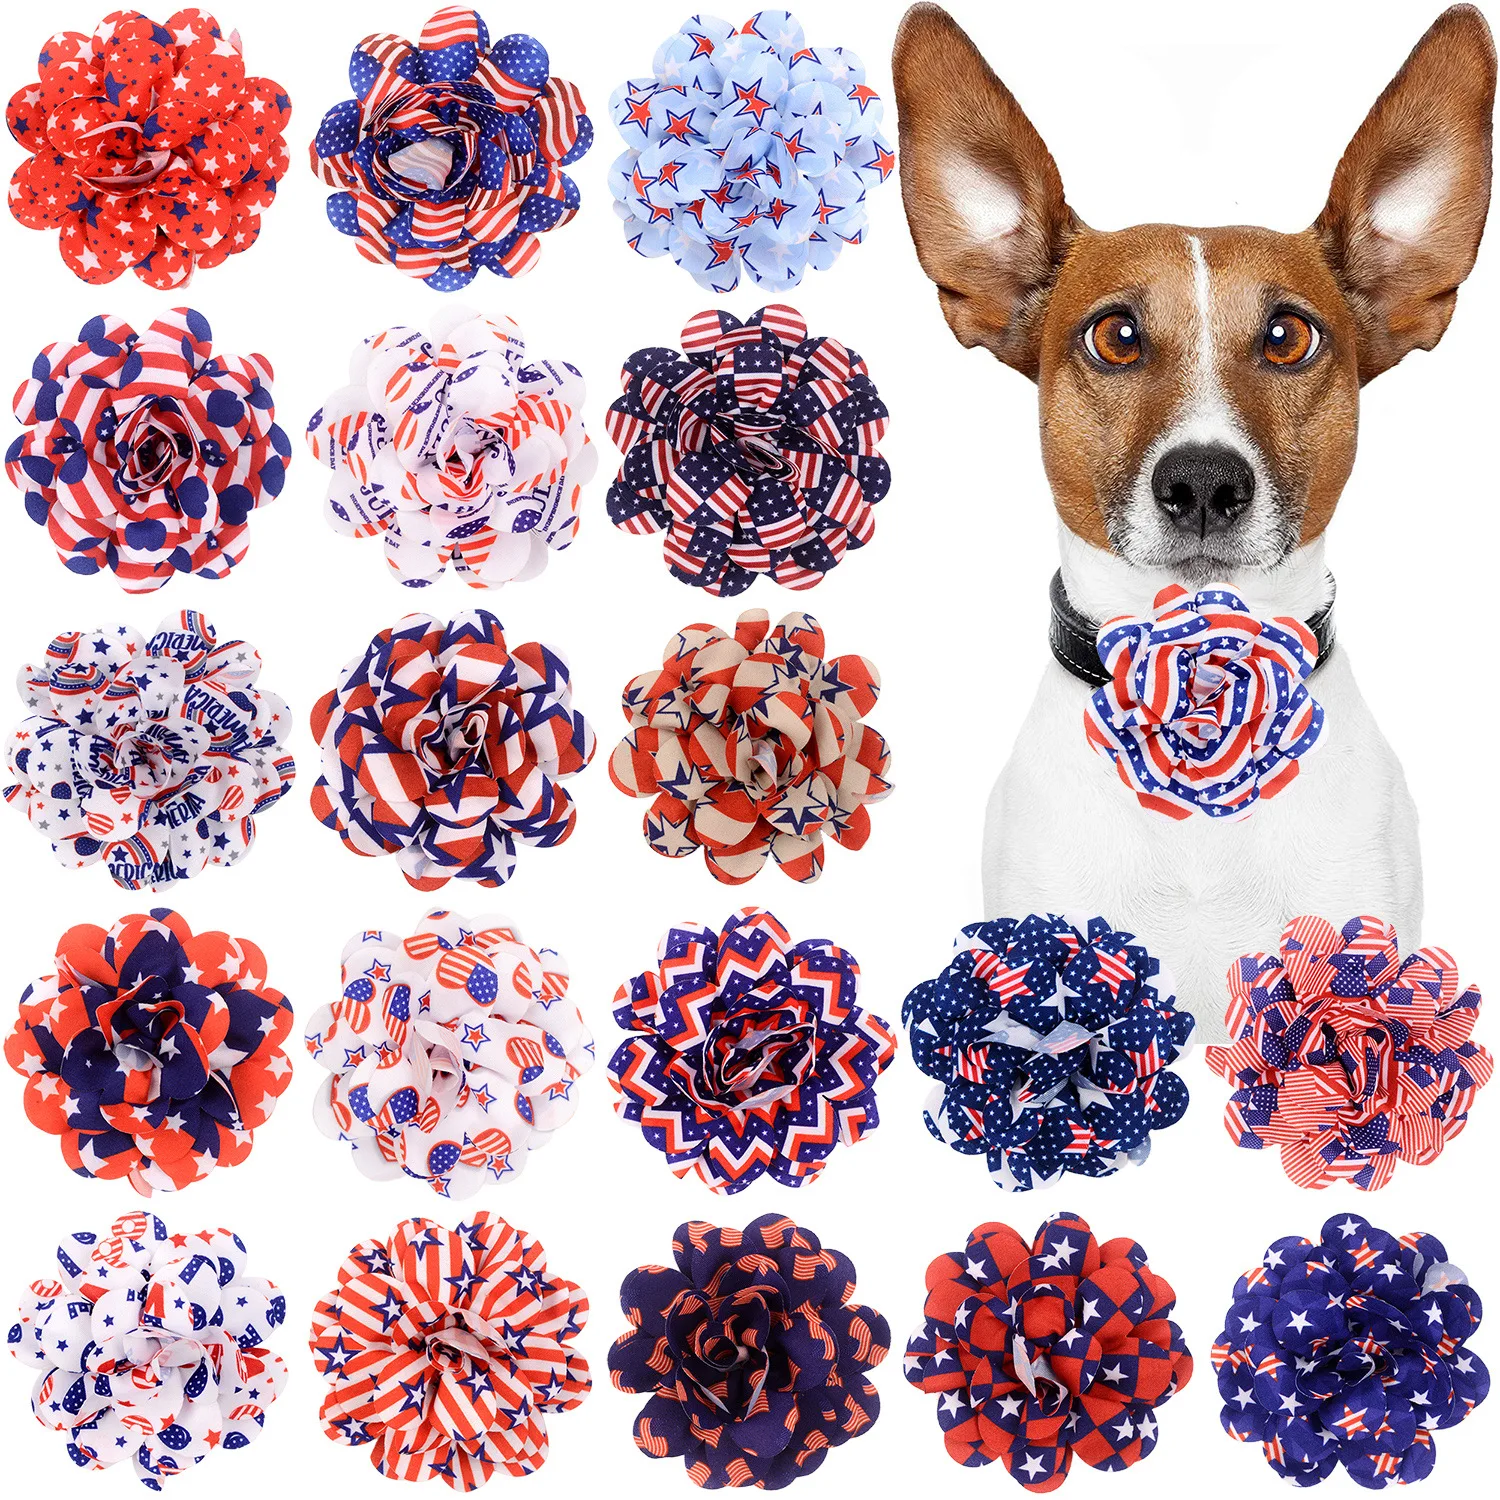 

50PS Removable Dog Bowtie For 4th July Dog Bows Dogs Pets Collar Accessories Small Dog Cat Bow Tie For American Independence Day